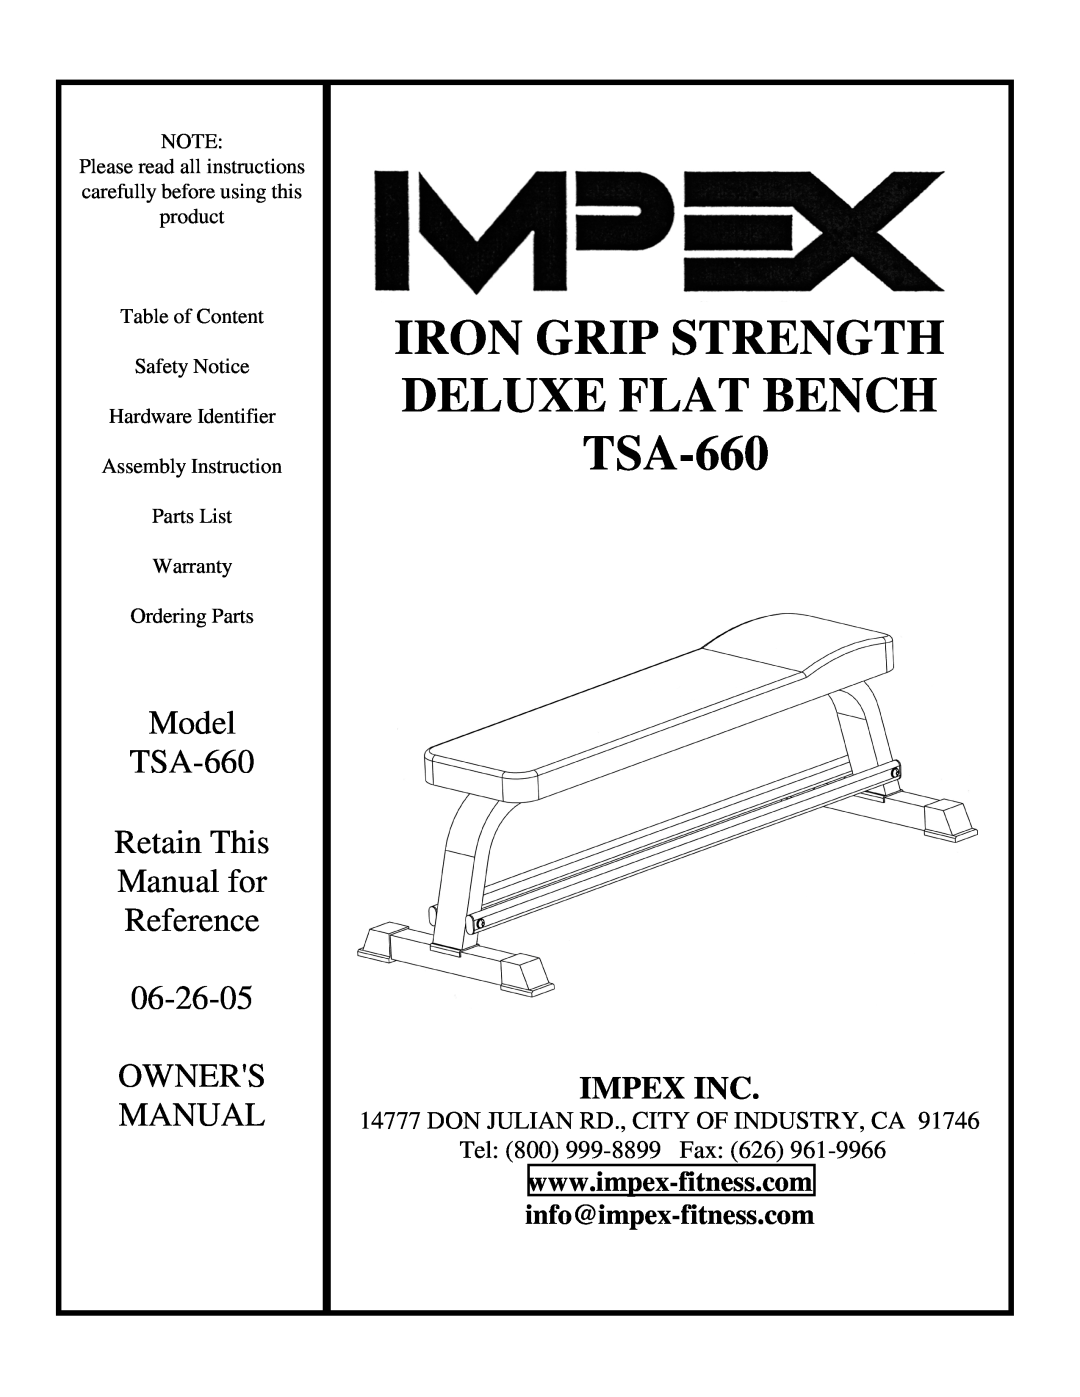 Impex manual Impex Inc, IRON GRIP STRENGTH DELUXE FLAT BENCH TSA-660 